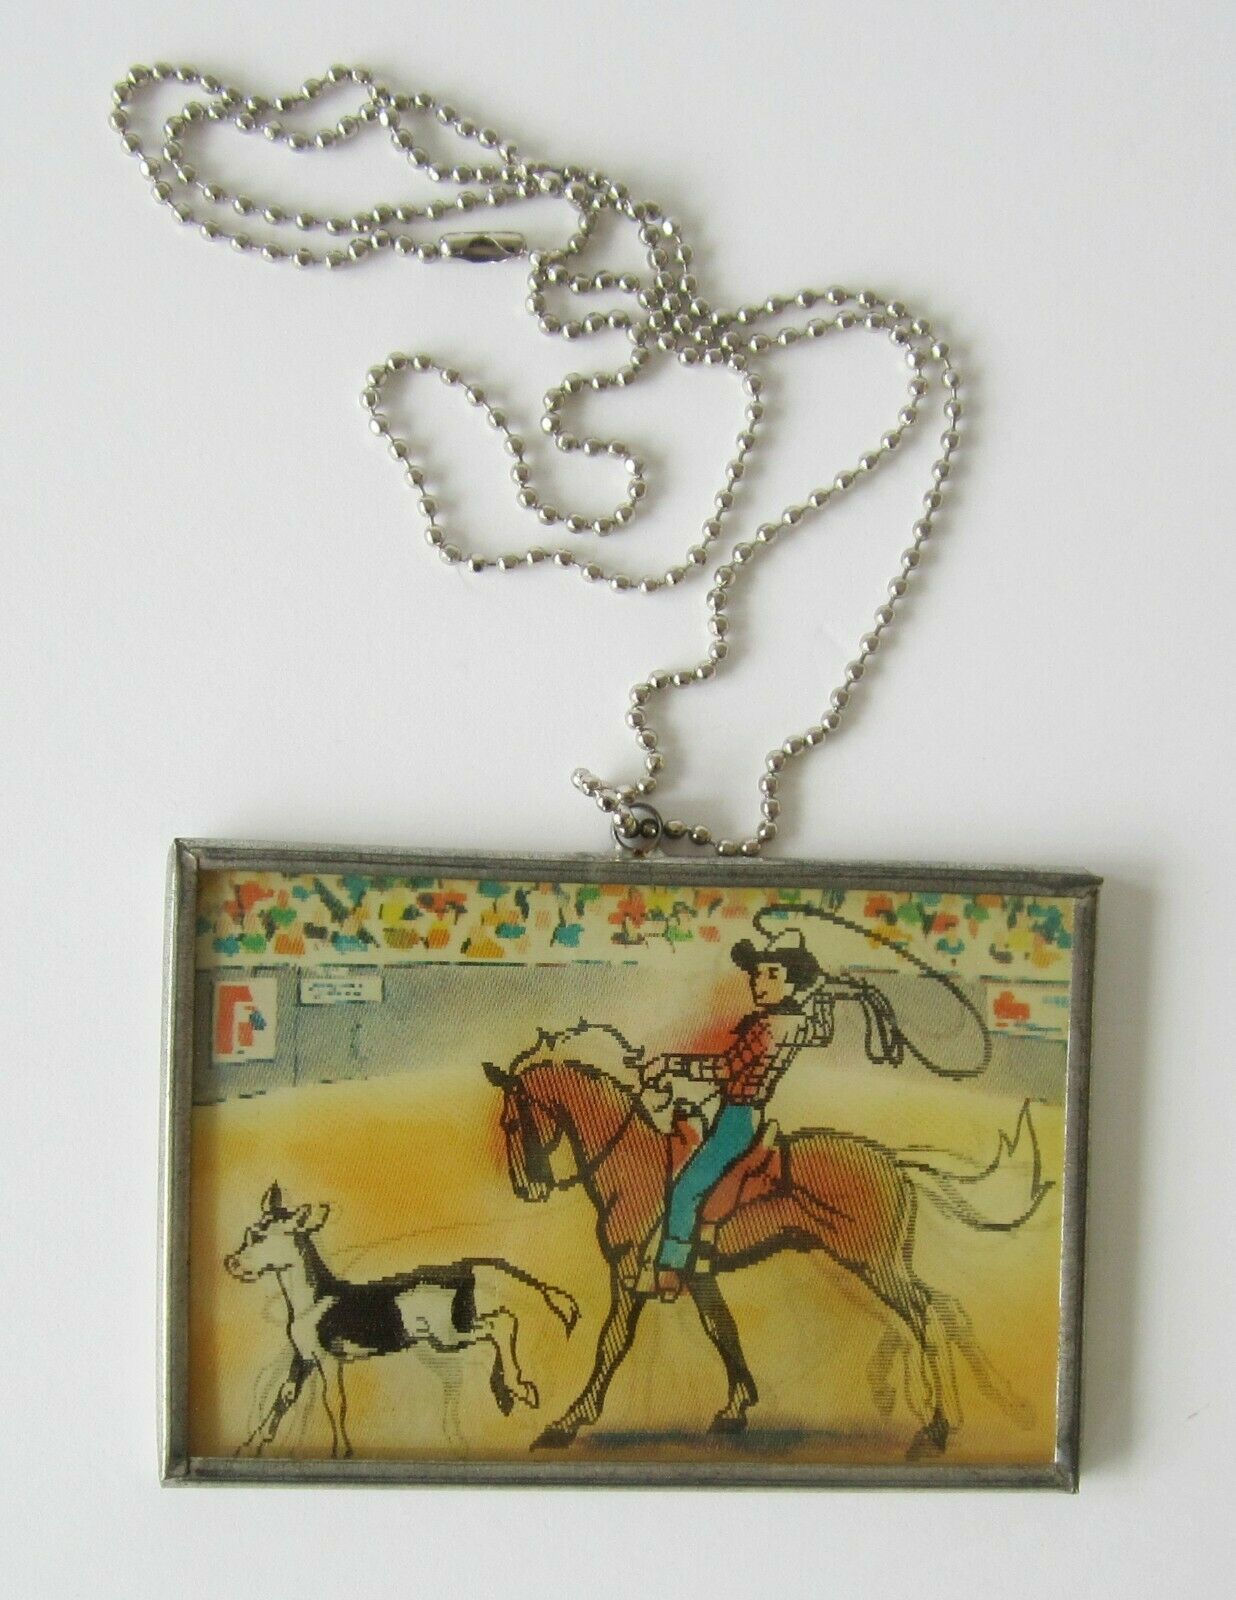 Rodeo Cowboy Calf Roping 1950's Vari-vue Motion Lenticular Picture Necklace